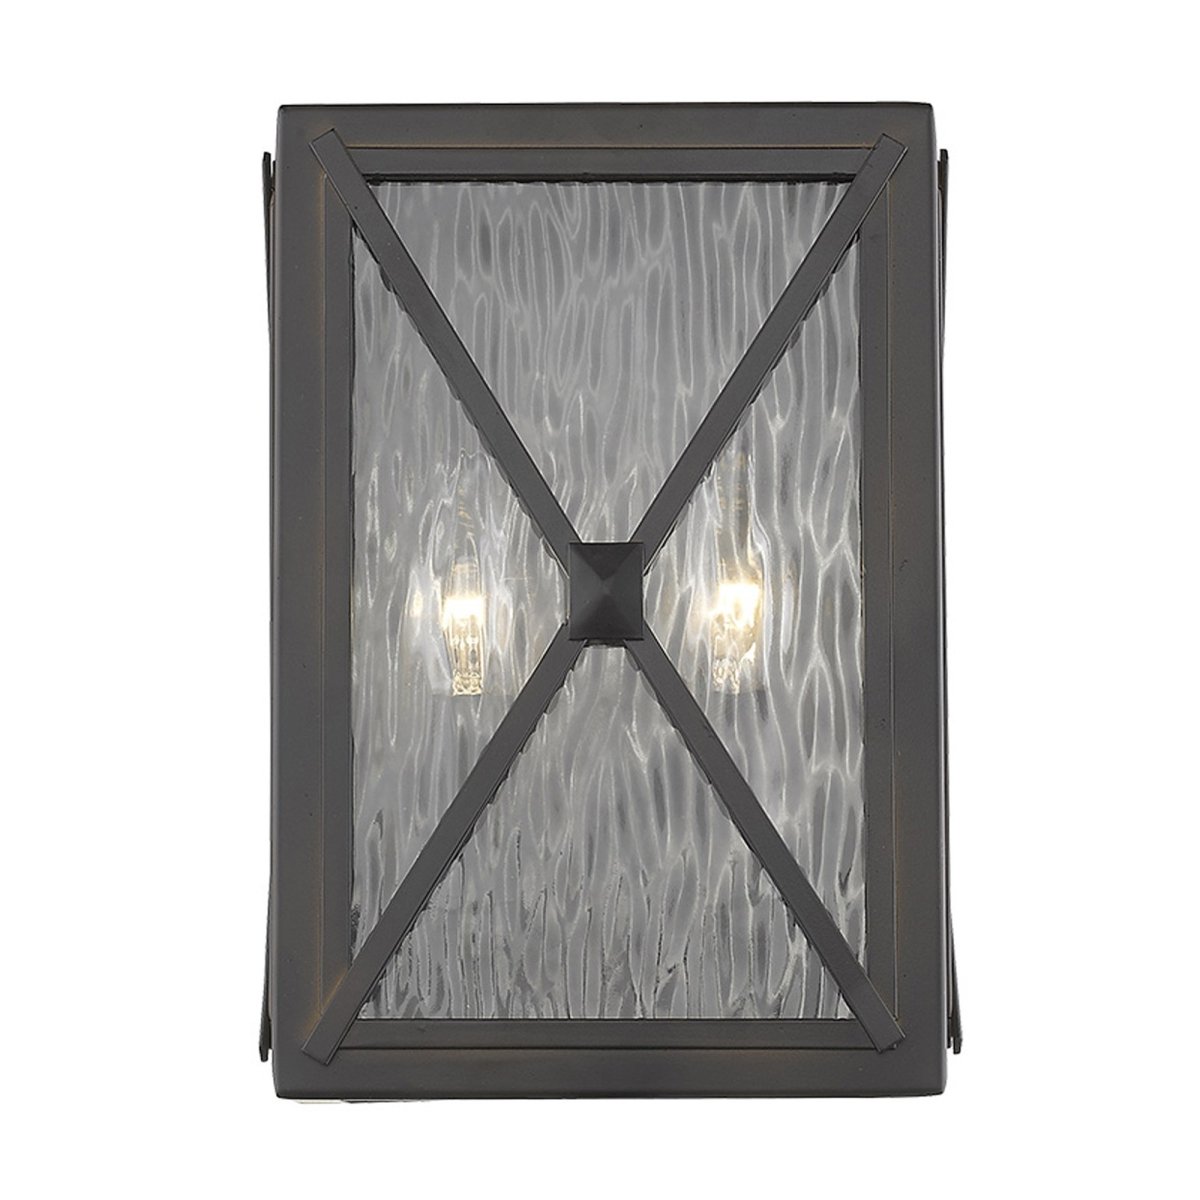 Picture of HomeRoots 398334 10.5 x 7.5 x 4.25 in. Brooklyn 2-Light Oil-Rubbed Bronze ADA Certified Wall Light